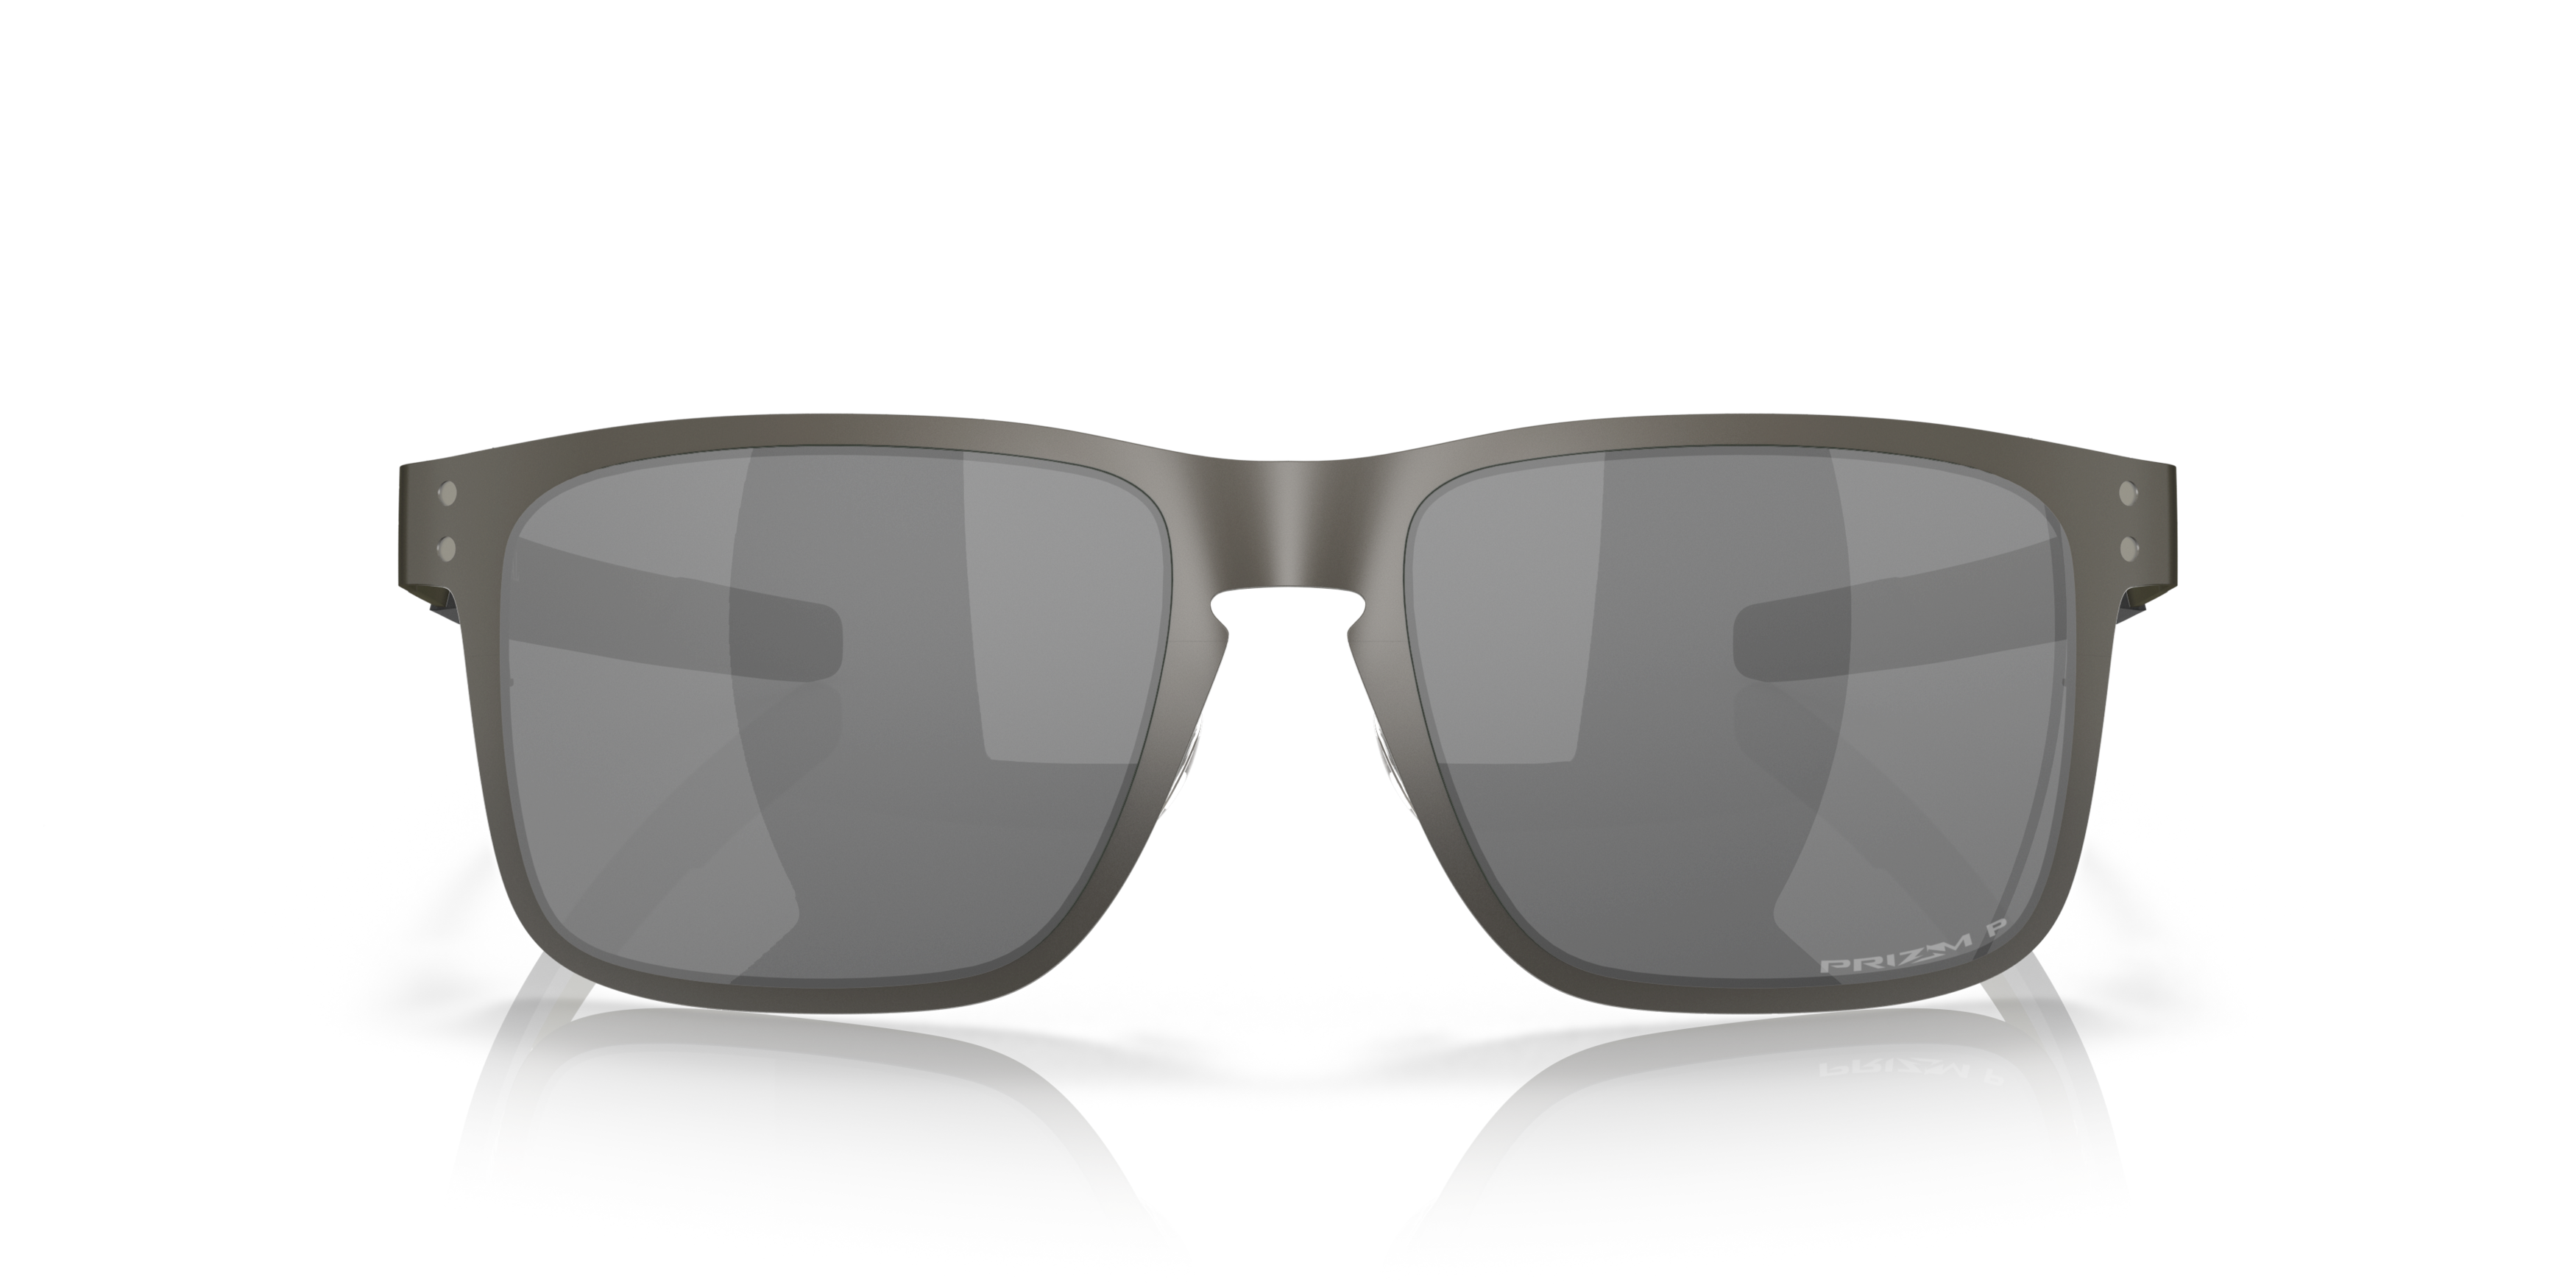 [products.image.front] OAKLEY HOLBROOK METAL OO4123 412306